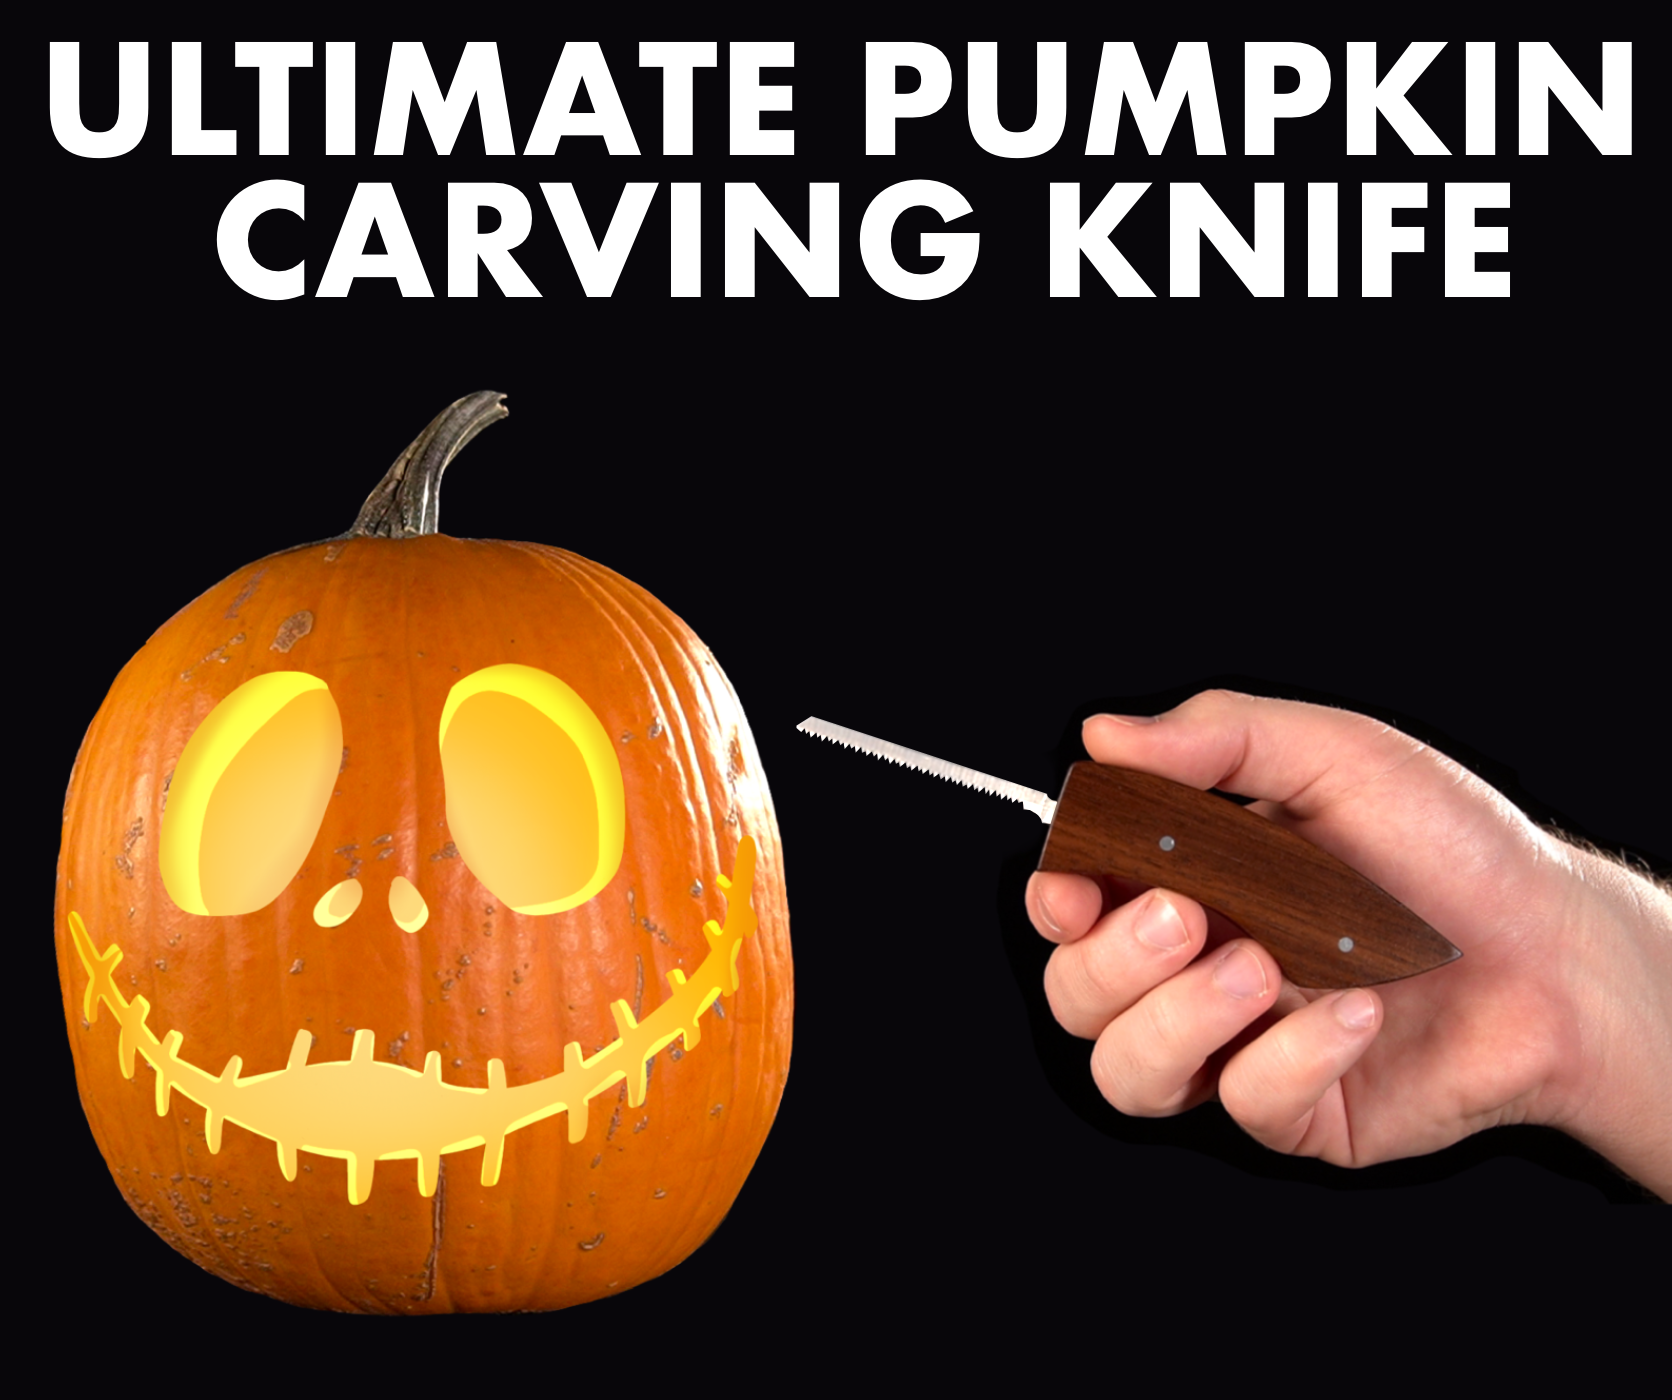 The Ultimate Pumpkin Carving Knife